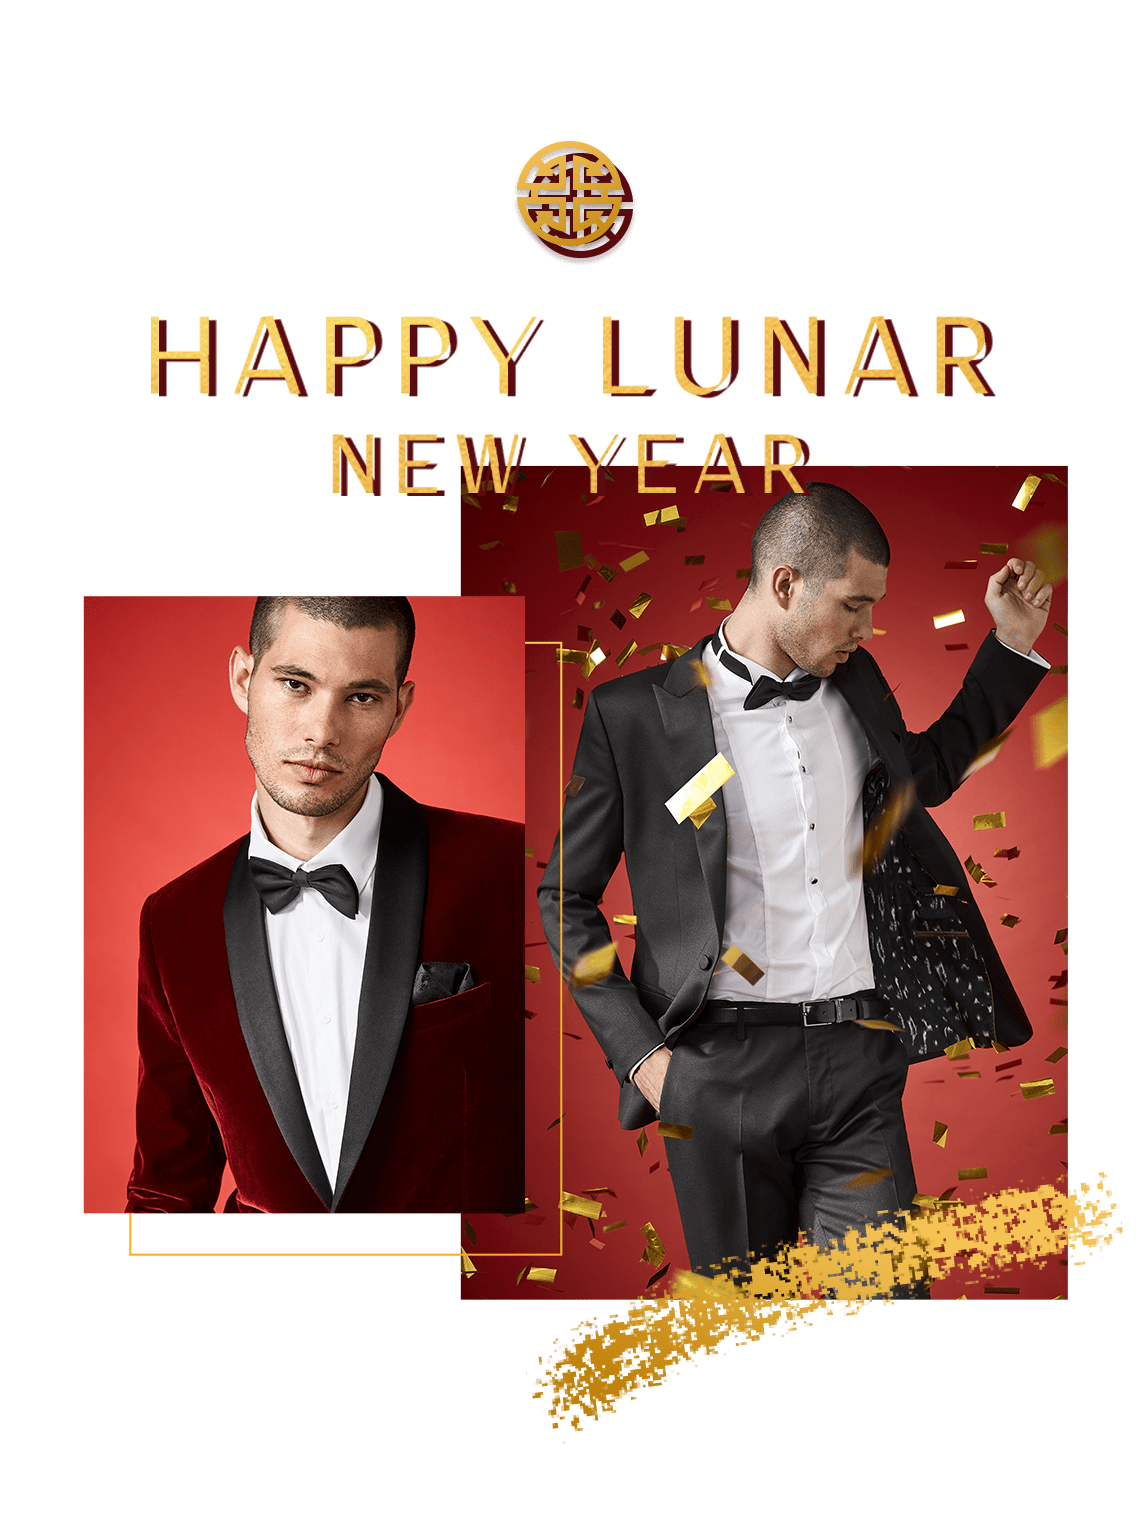 Man in tuxedo, with text: Happy lunar new year